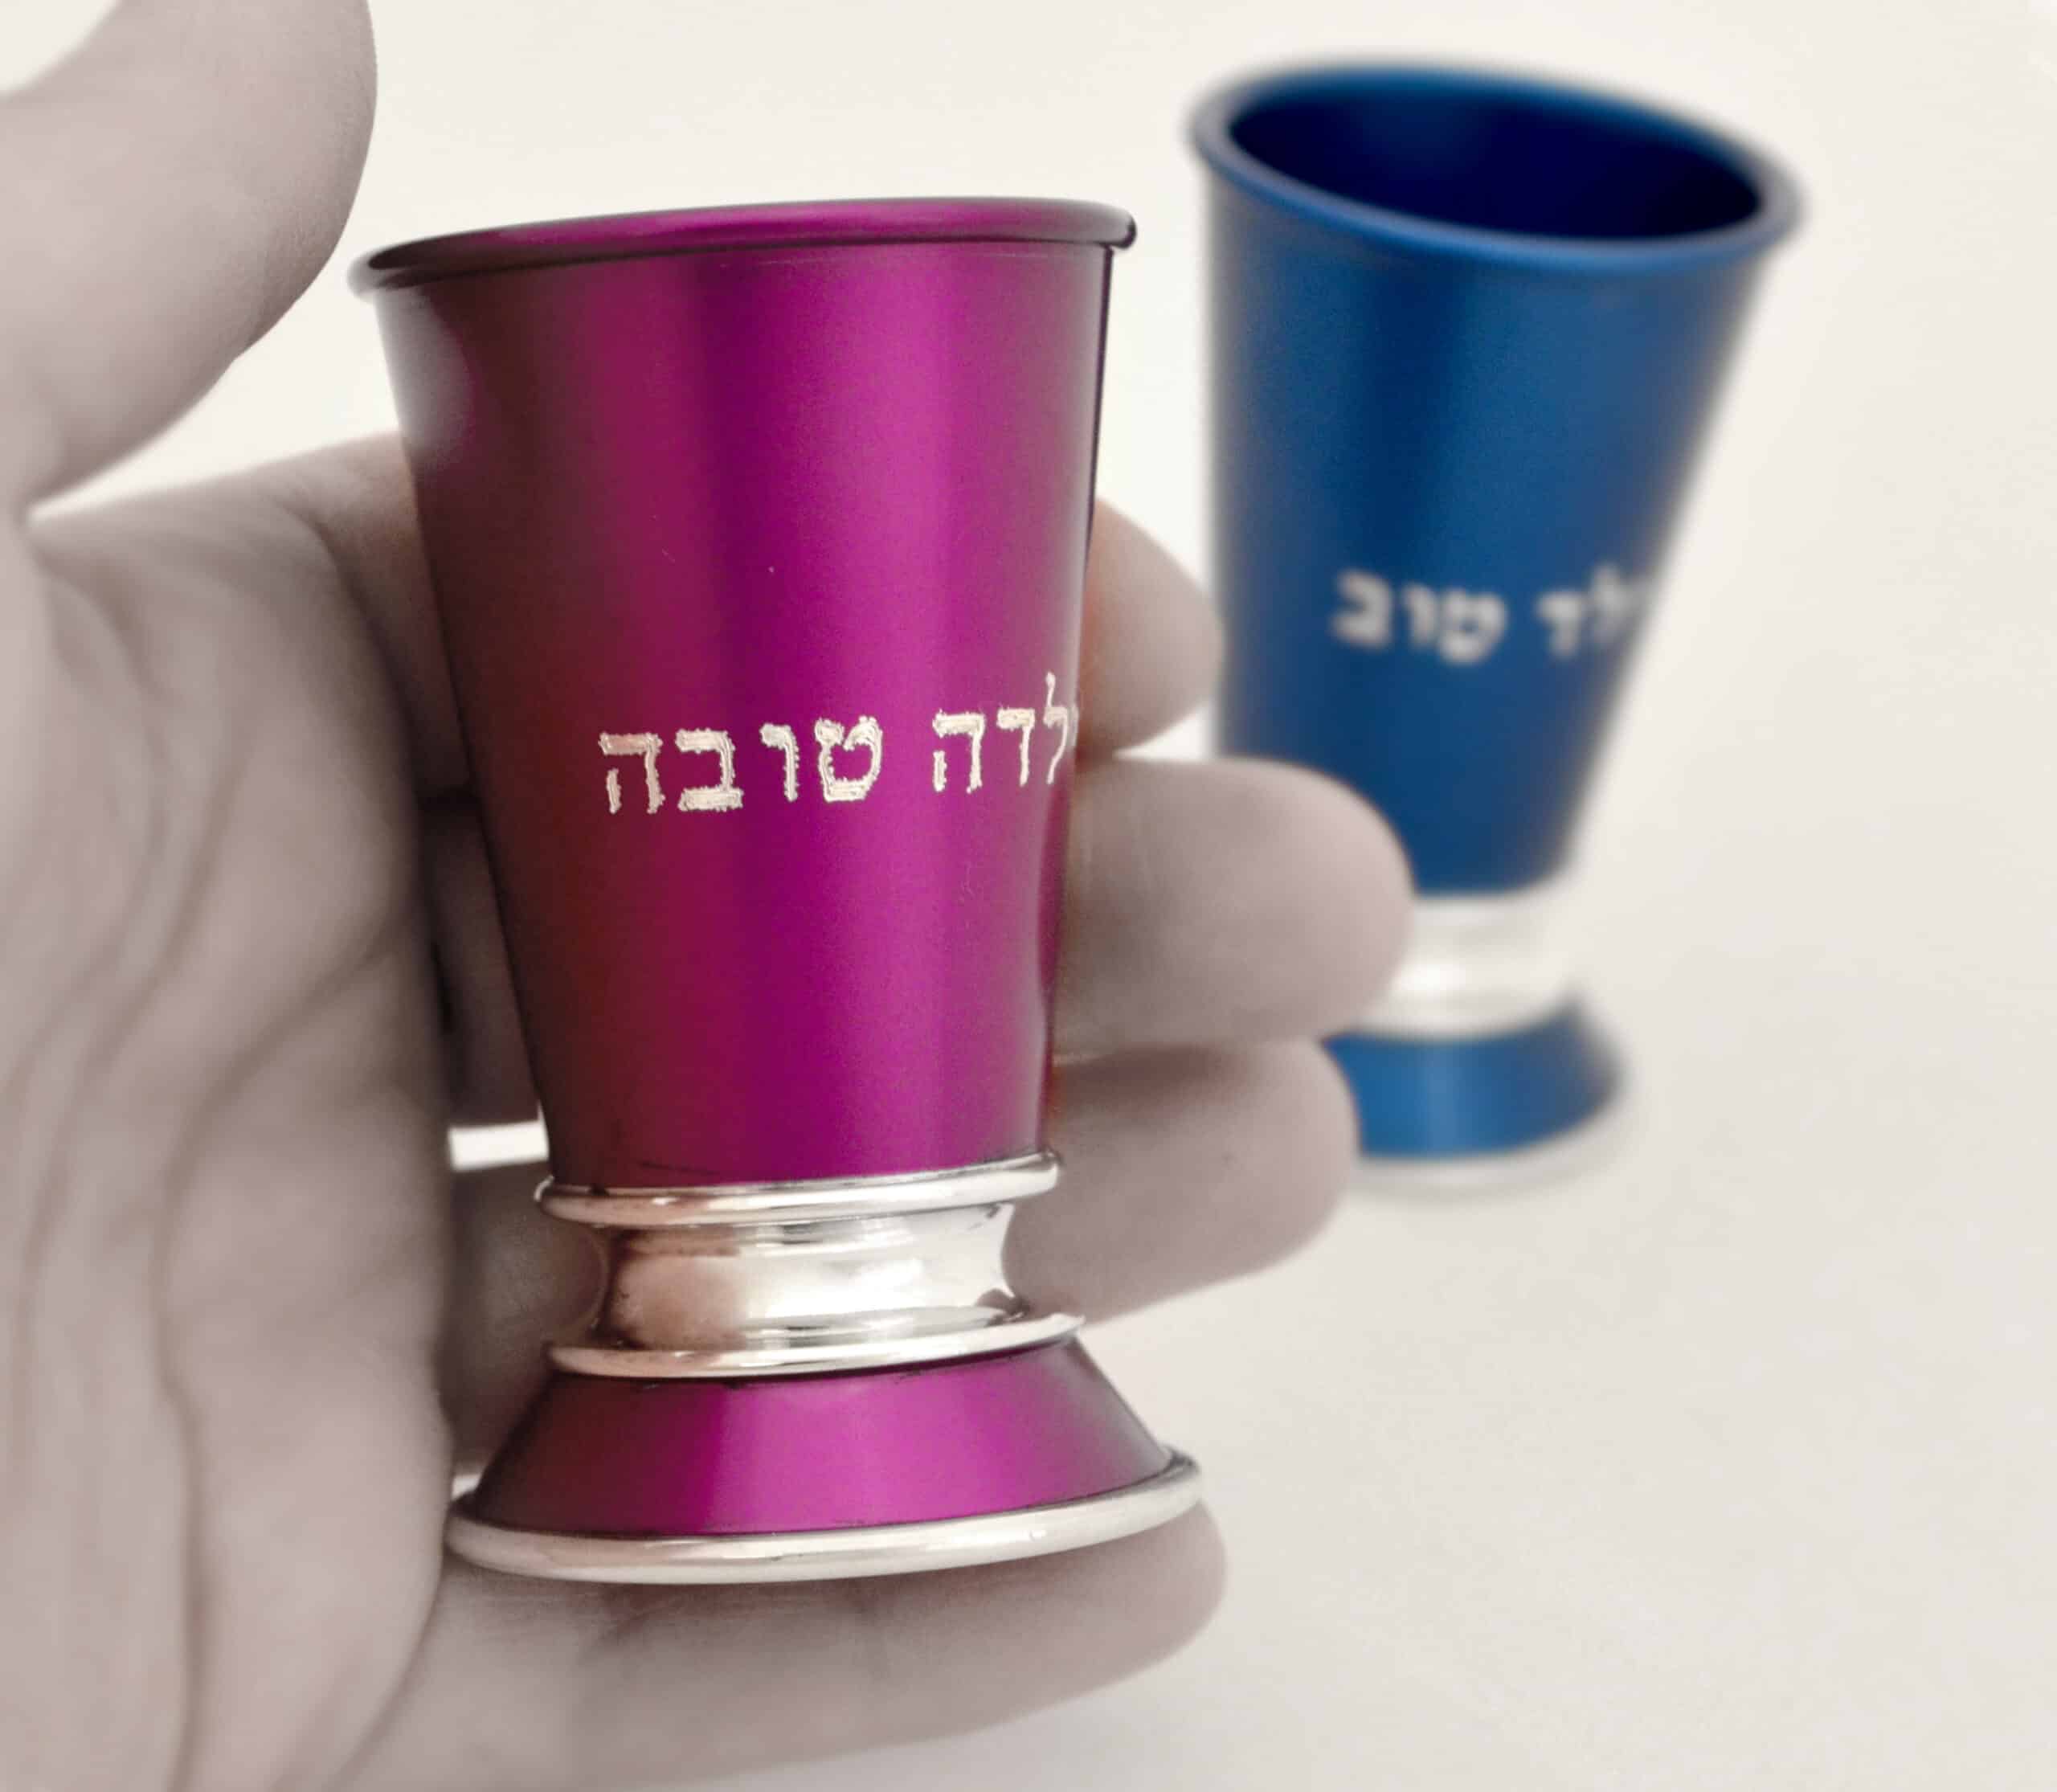 Anodized Aluminum Yeled tov Cup Colorful